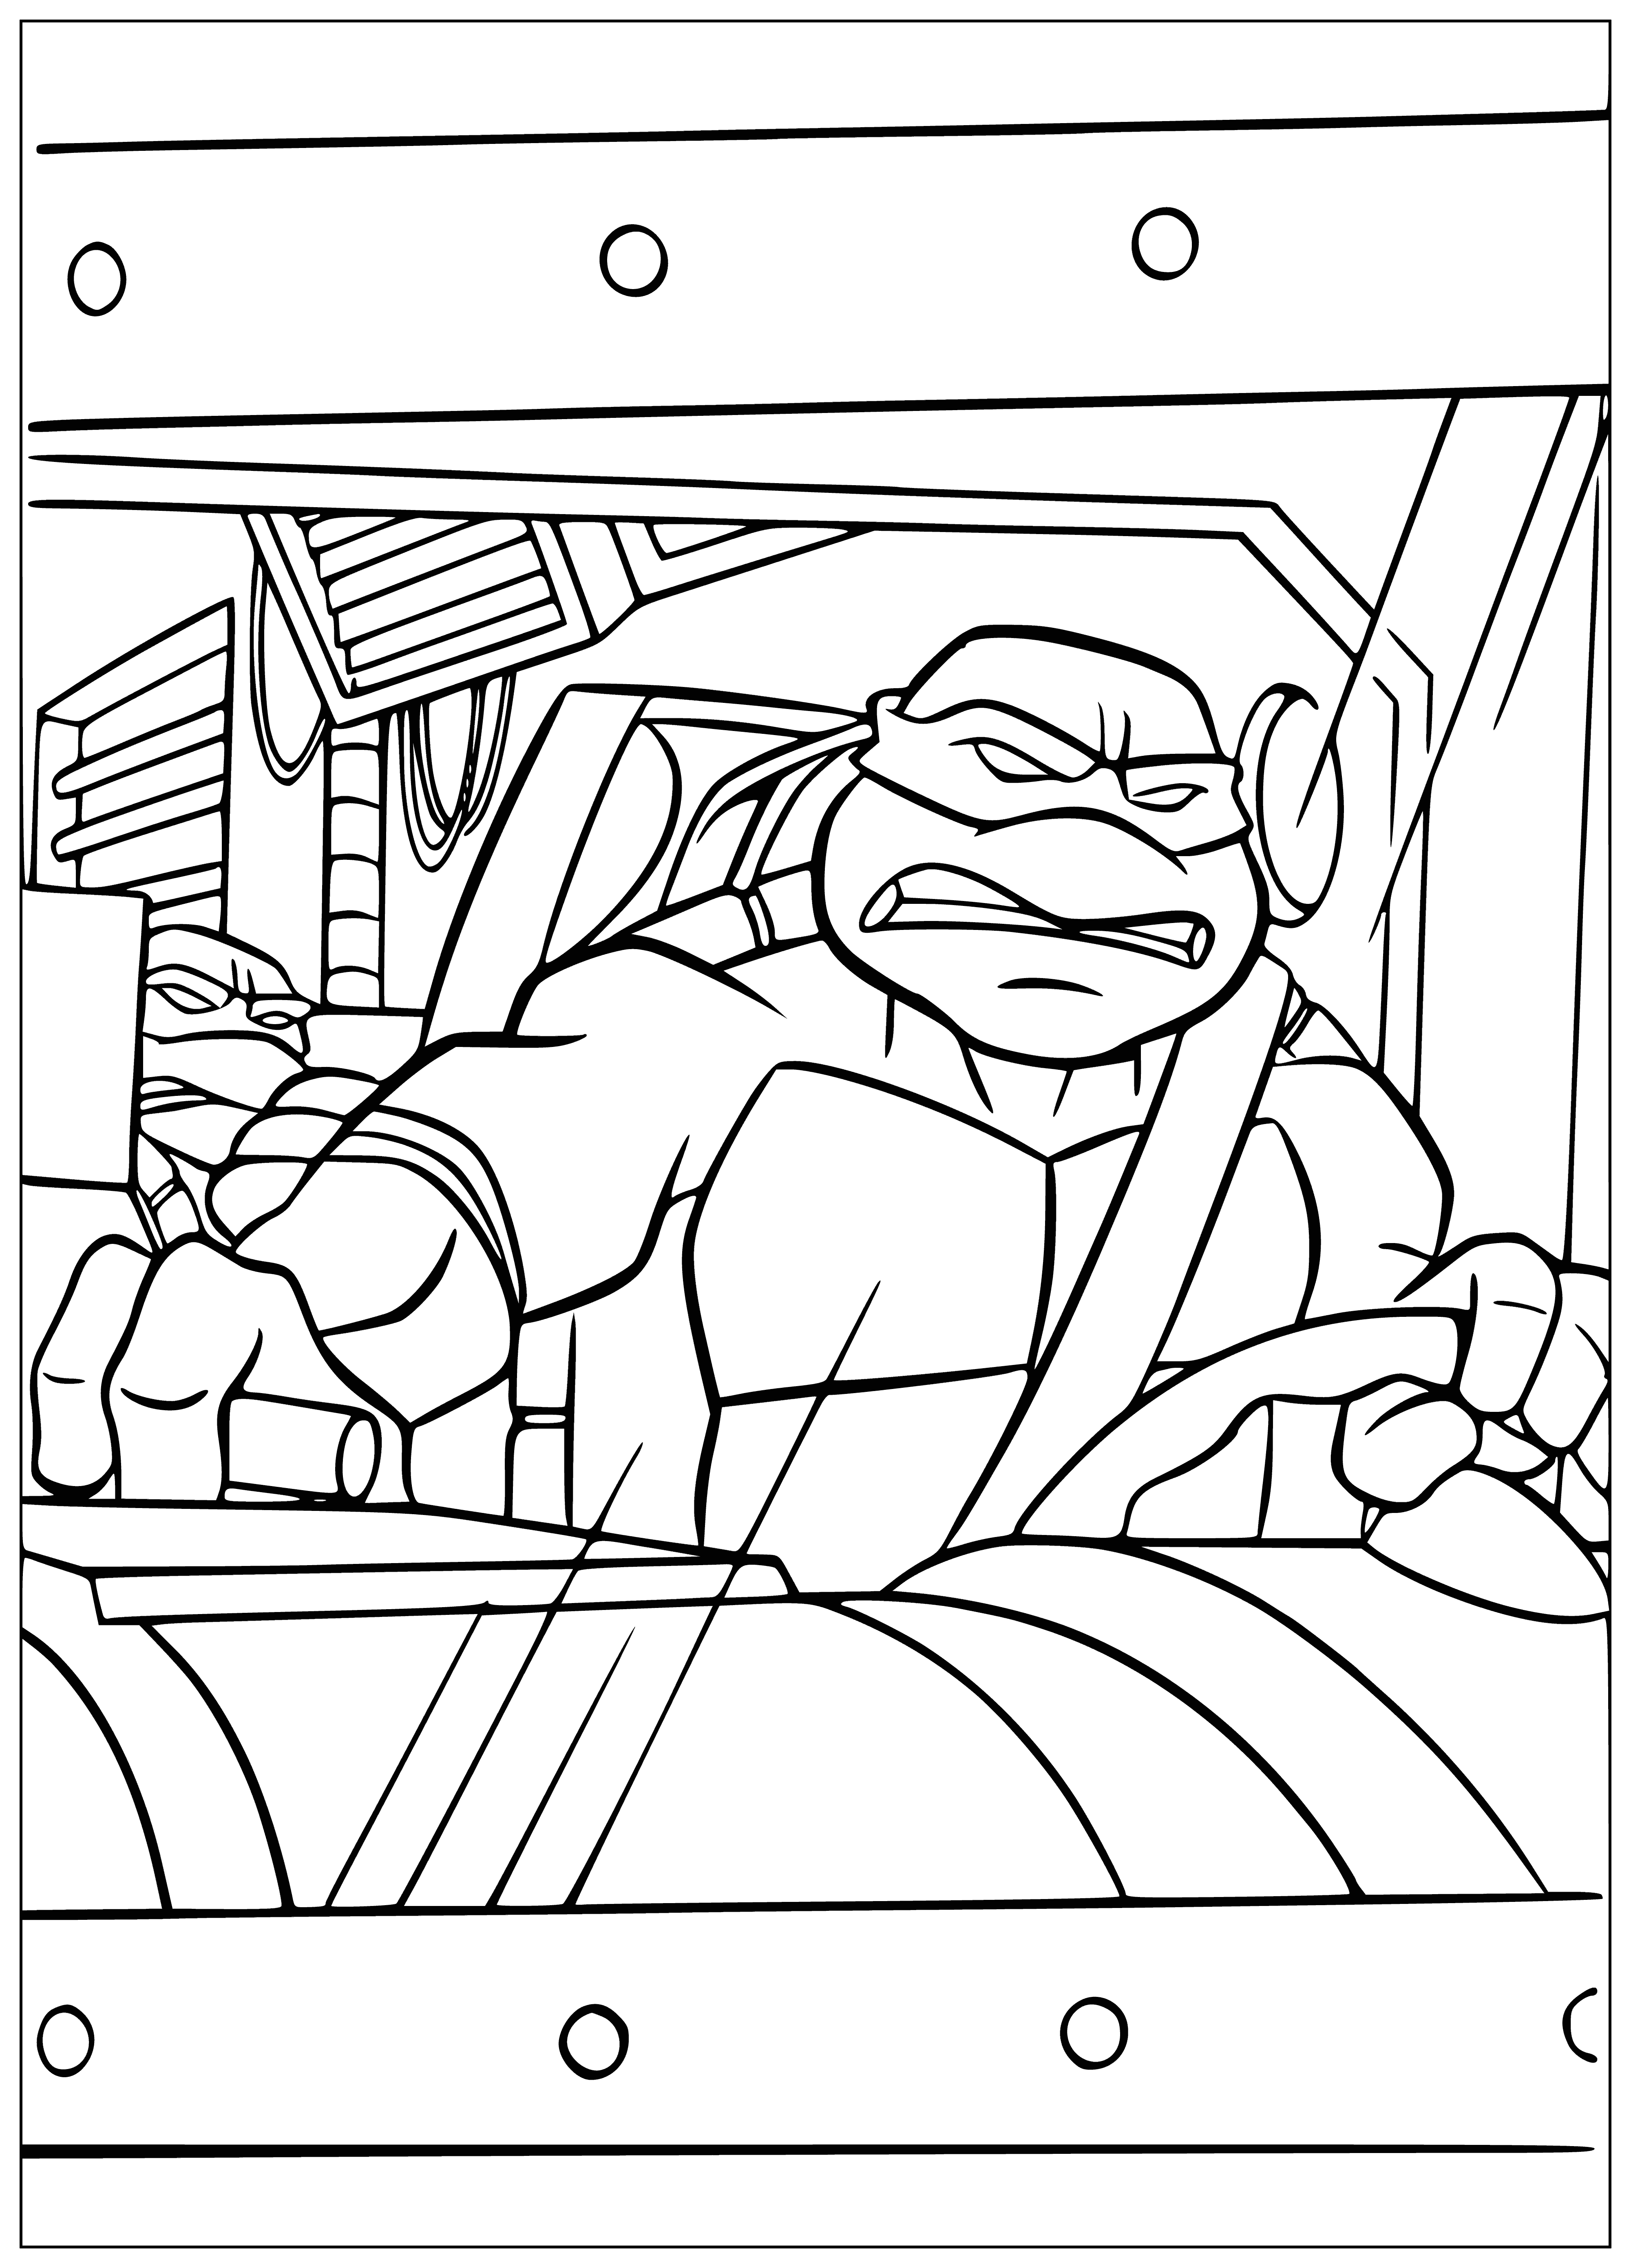 Turtle car coloring page